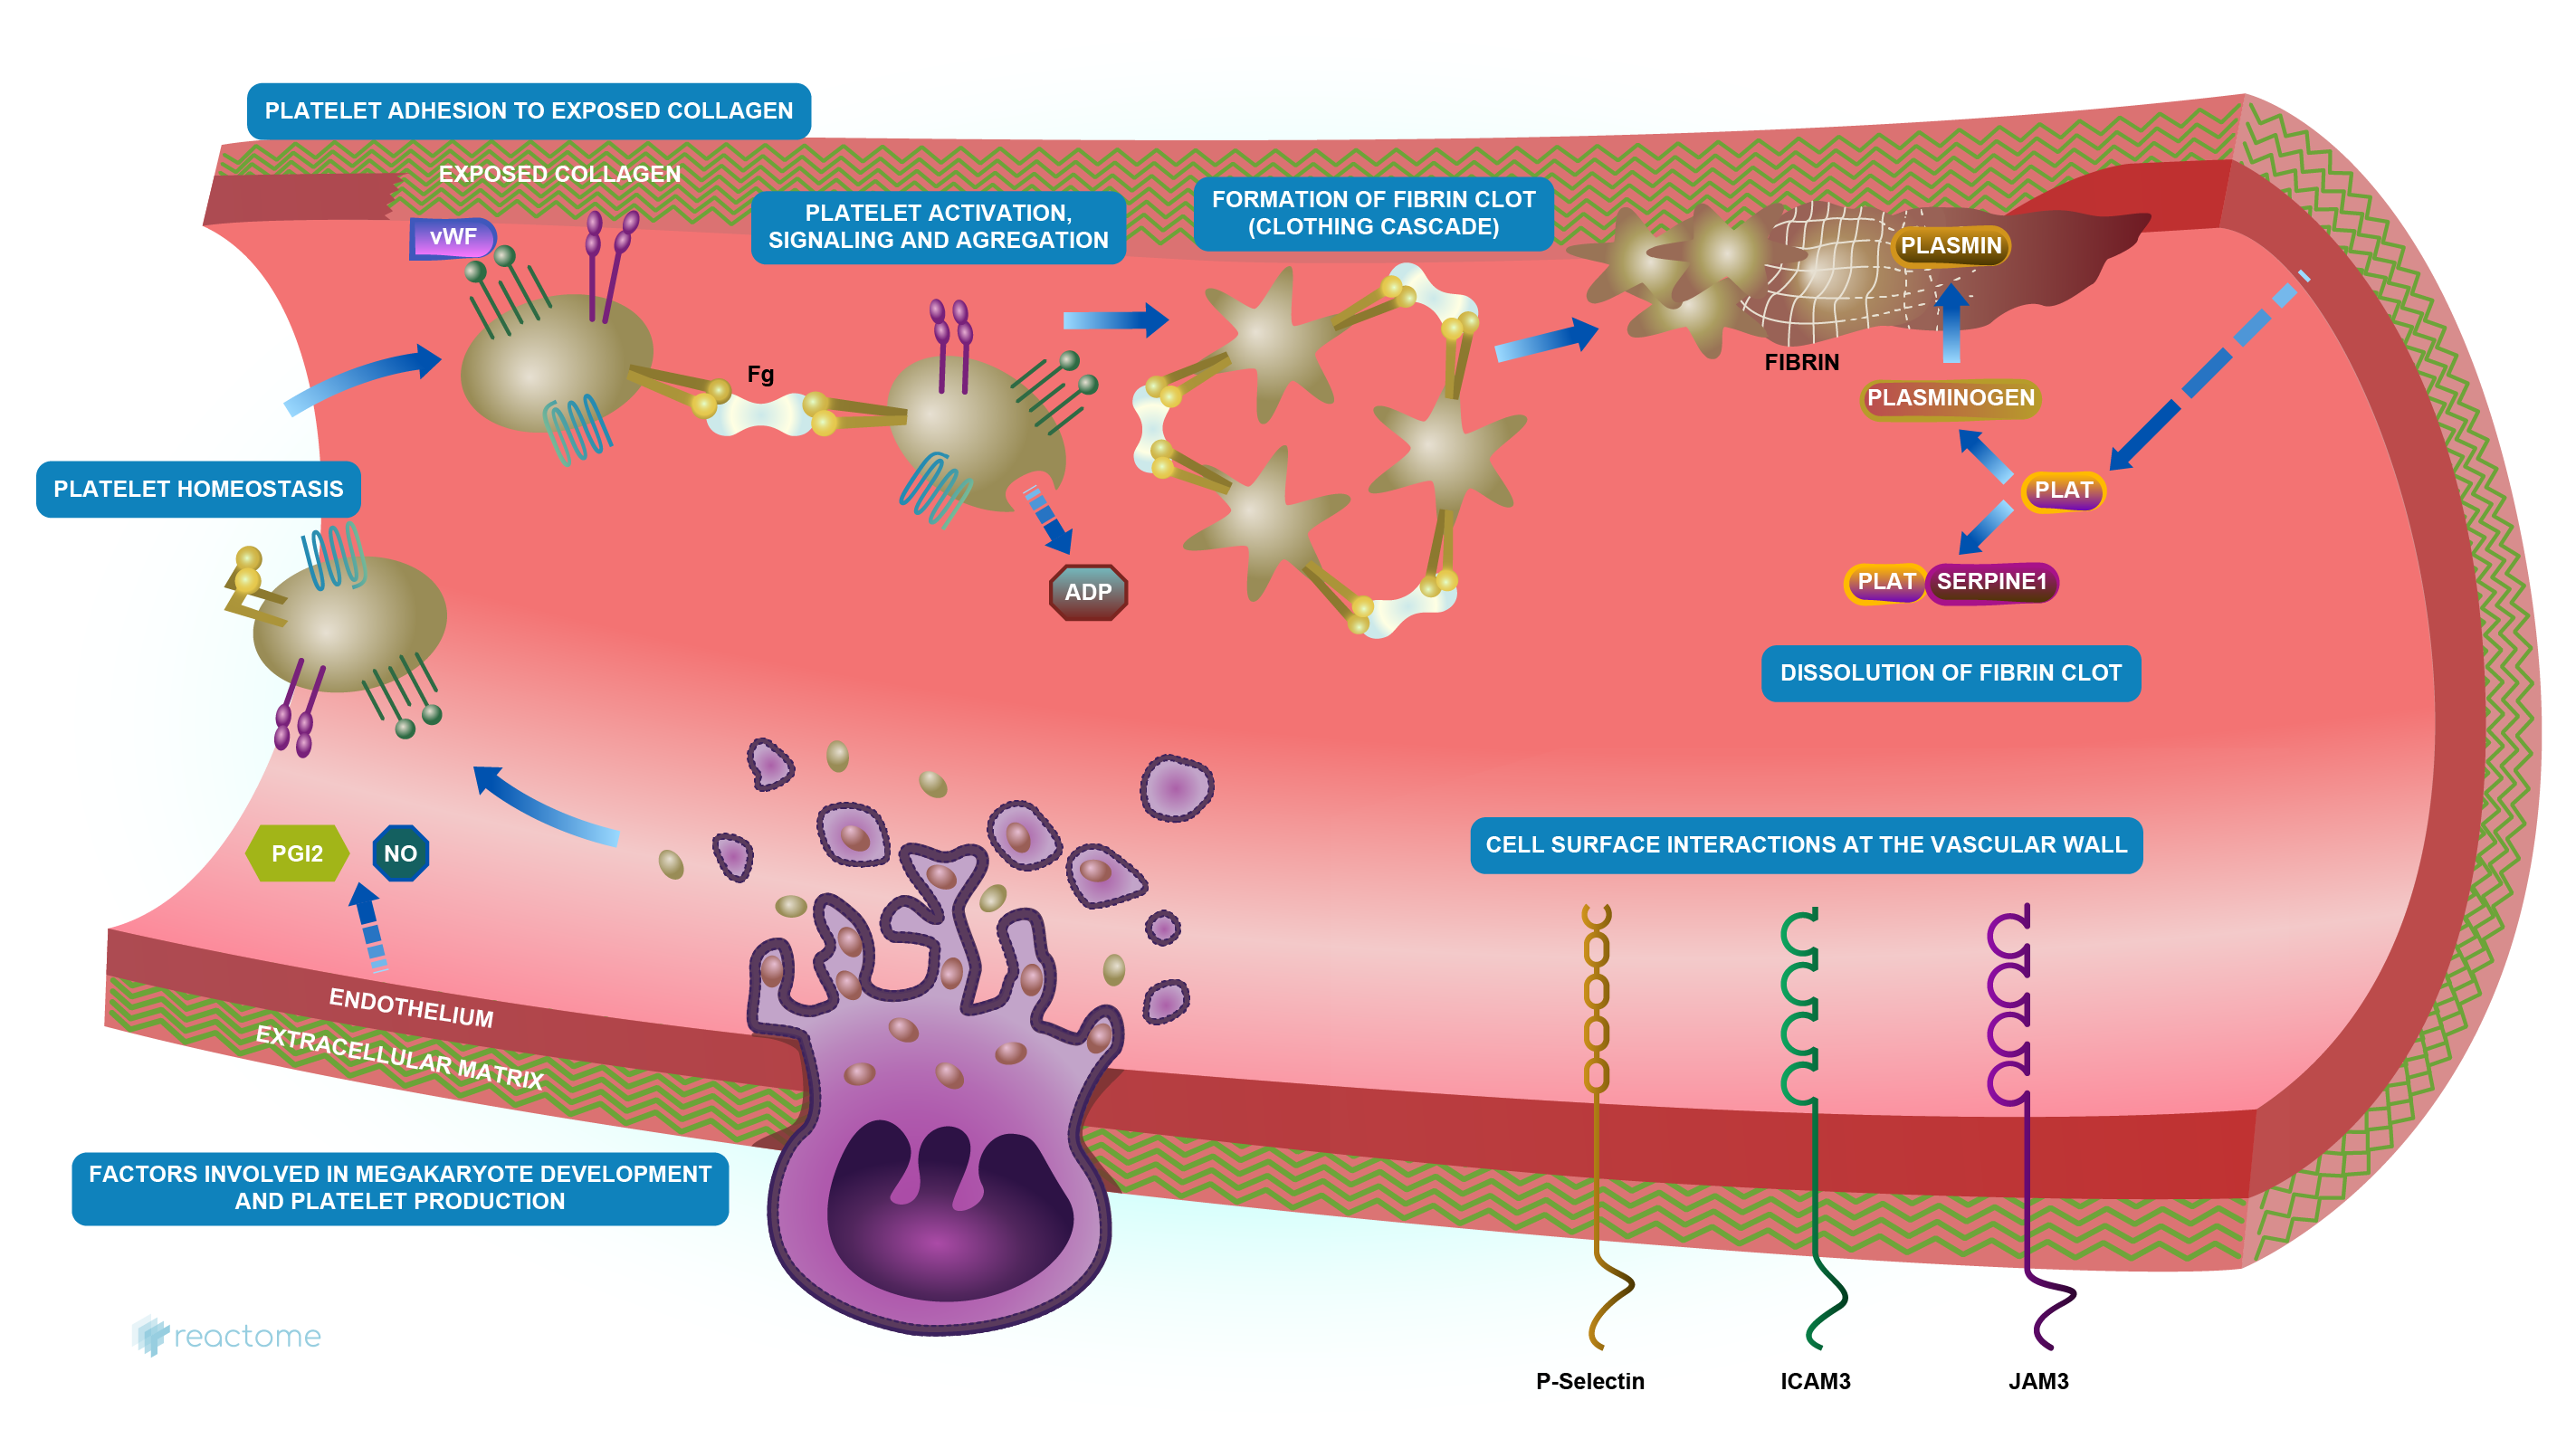 Hemostasis illustrations from Reactome